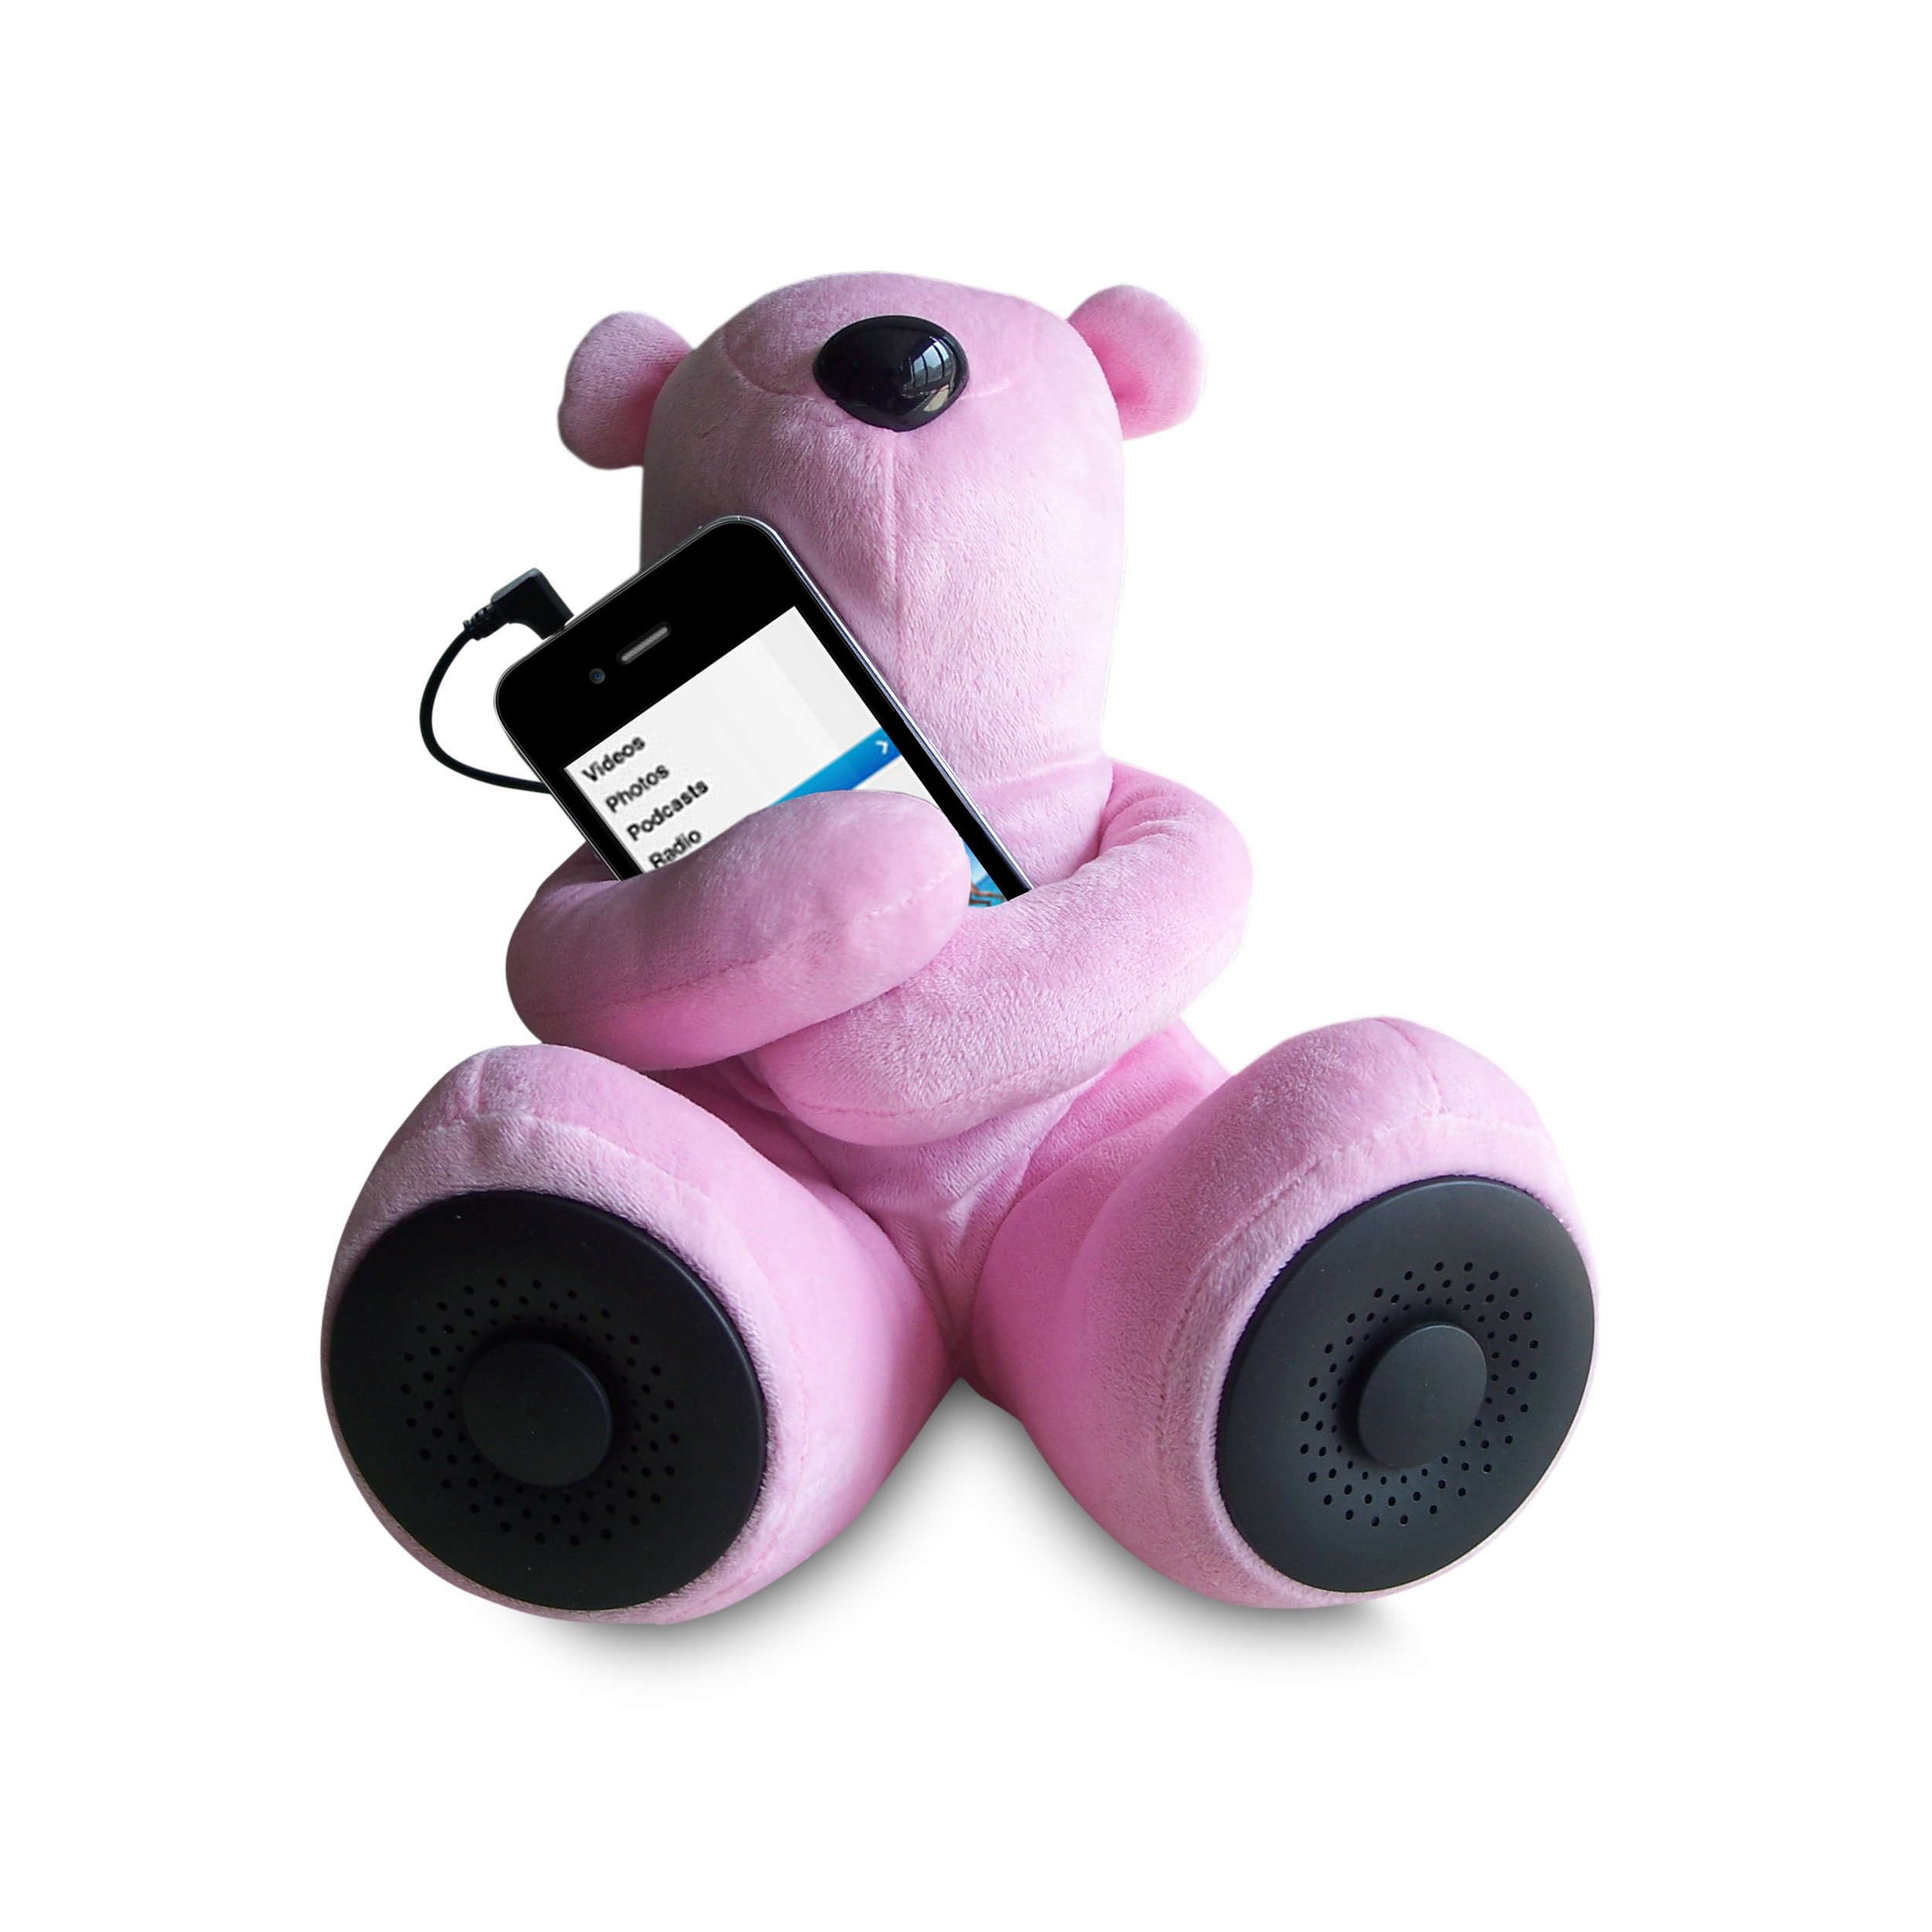 Sungale S-T1 Portable Teddy Speaker For iPod, iPhone, Smartphone, MP3, Media Player (Pink)